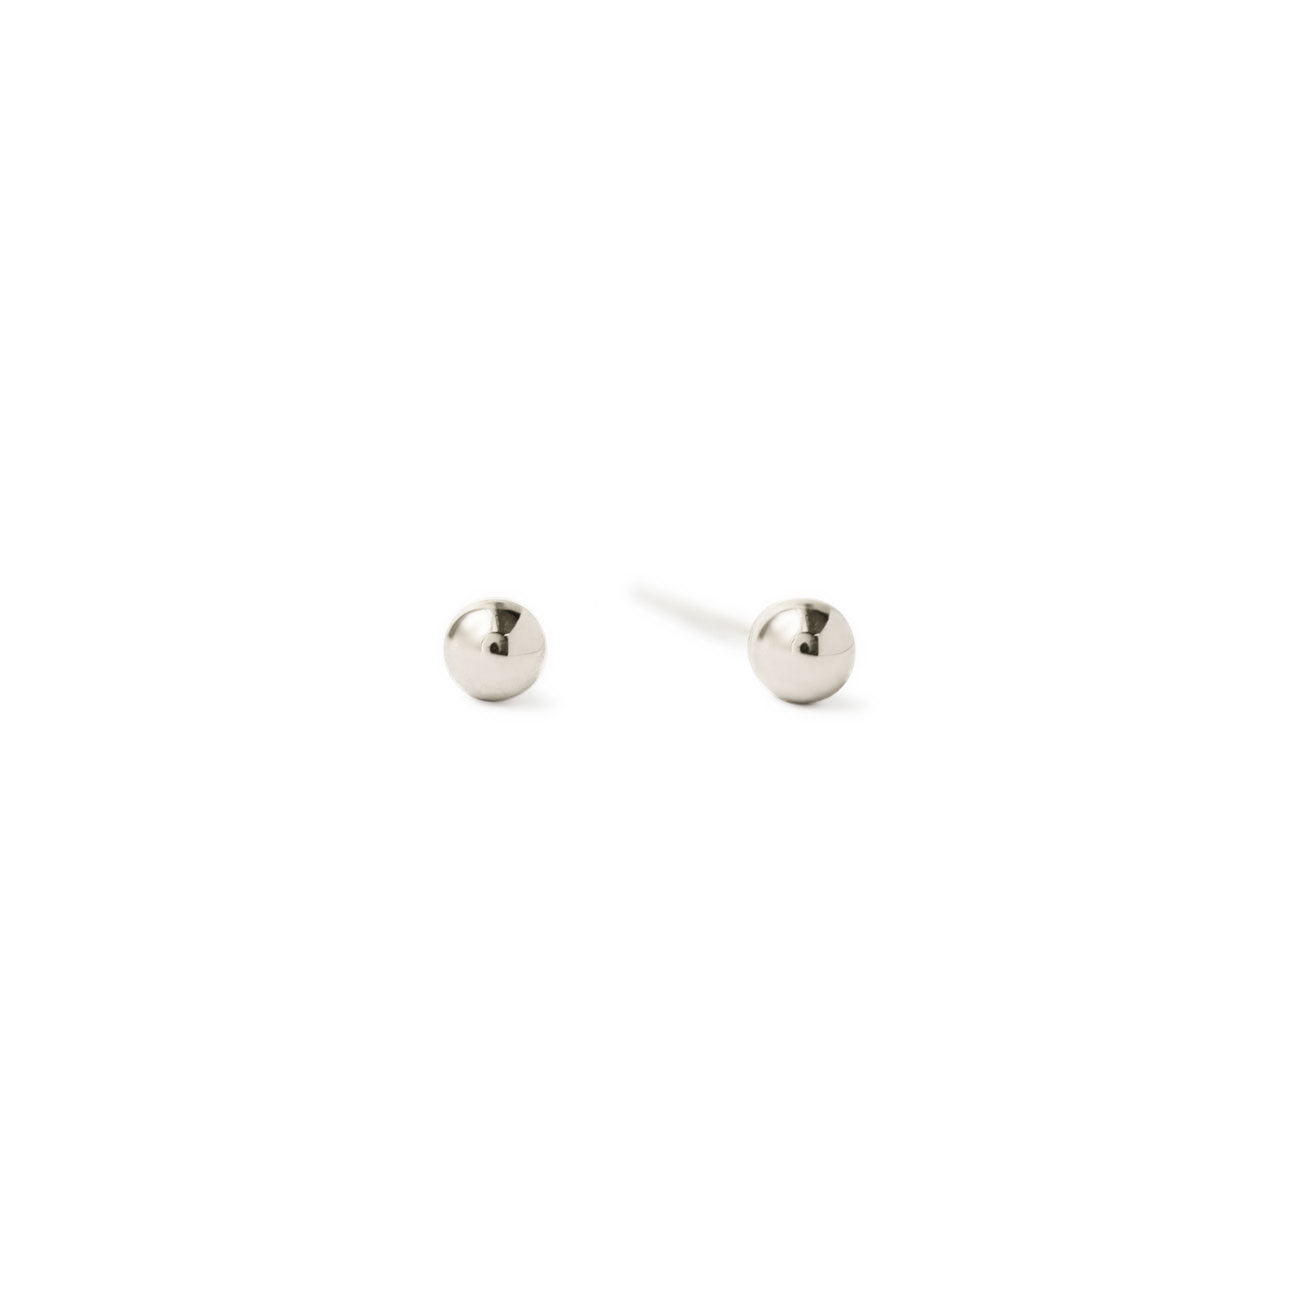 18ct White Gold 6-Claw Diamond Stud Earring1 | Silvermoon